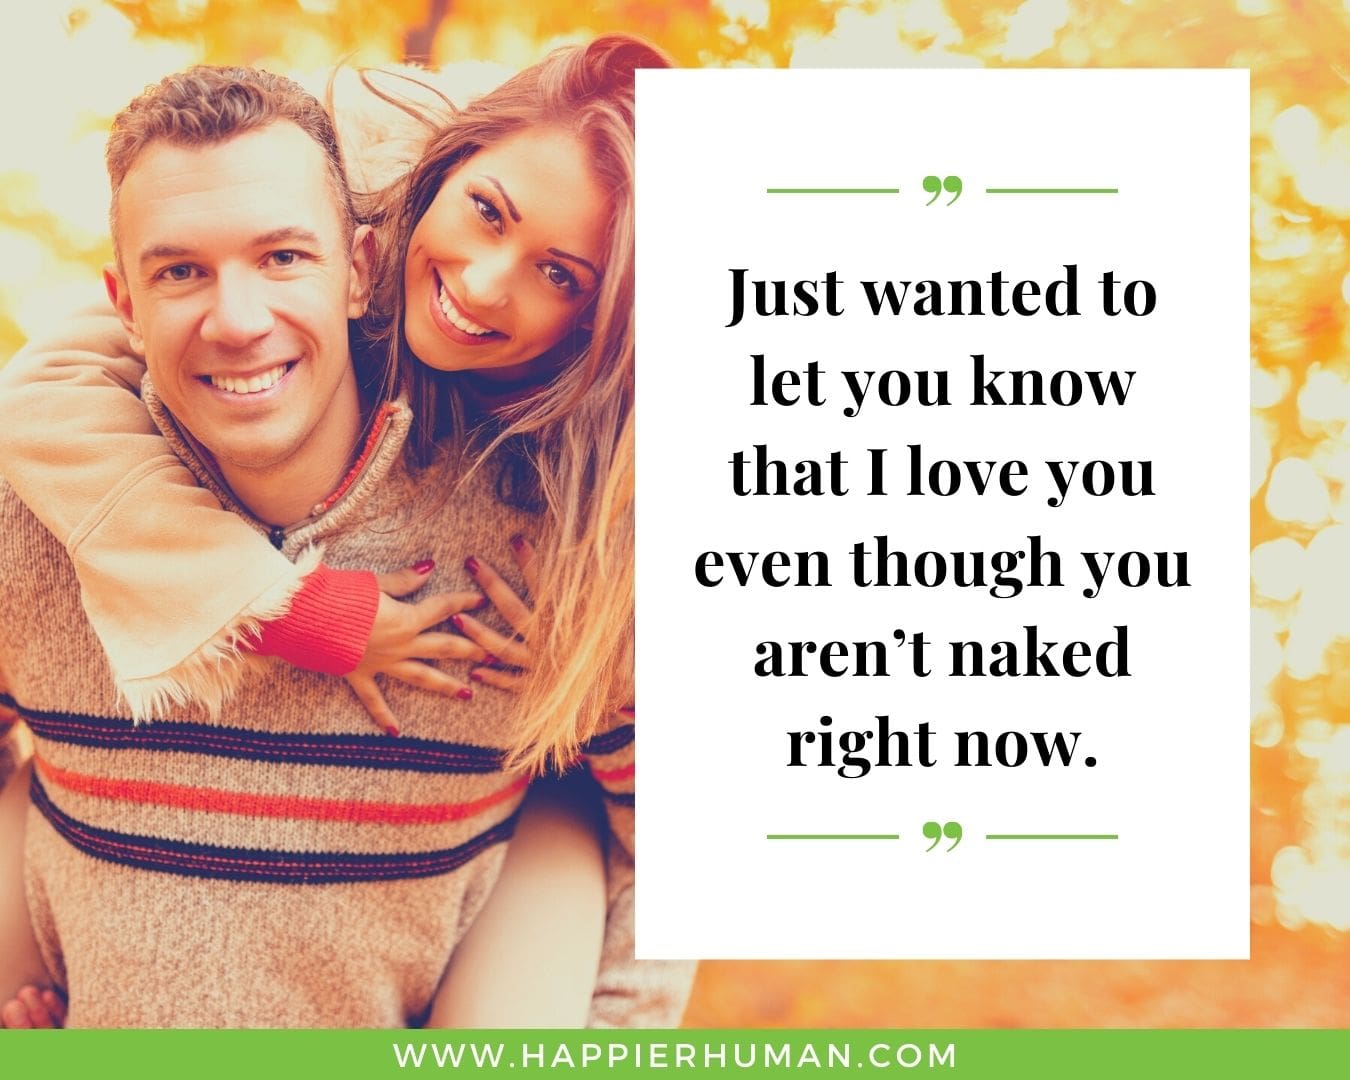 I love her quotes and messages- “Just wanted to let you know that I love you even though you aren’t naked right now.”